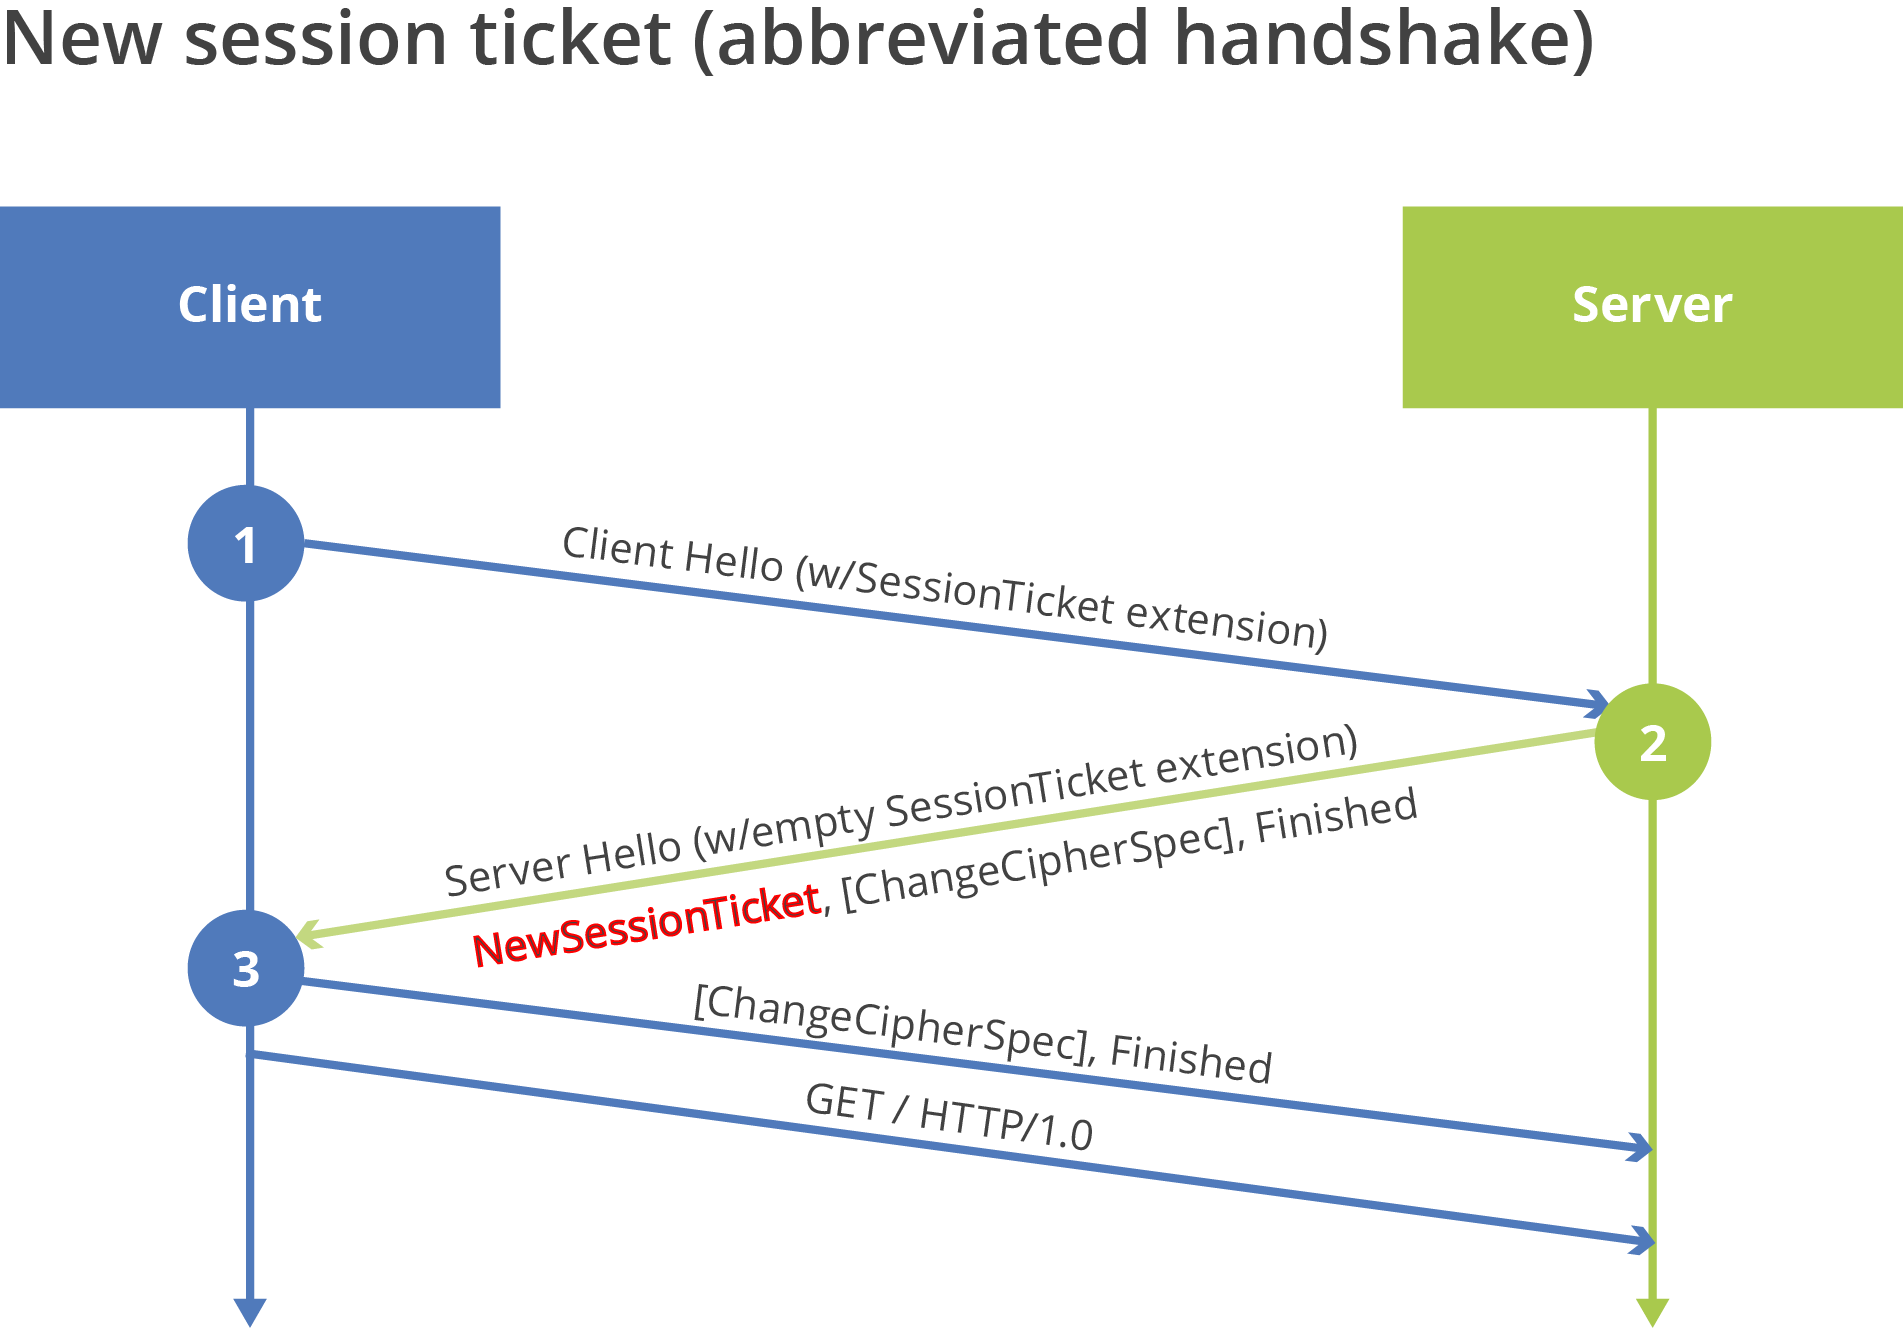 Figure 3 - Server Issuing New Session Ticket during Abbreviated Handshake